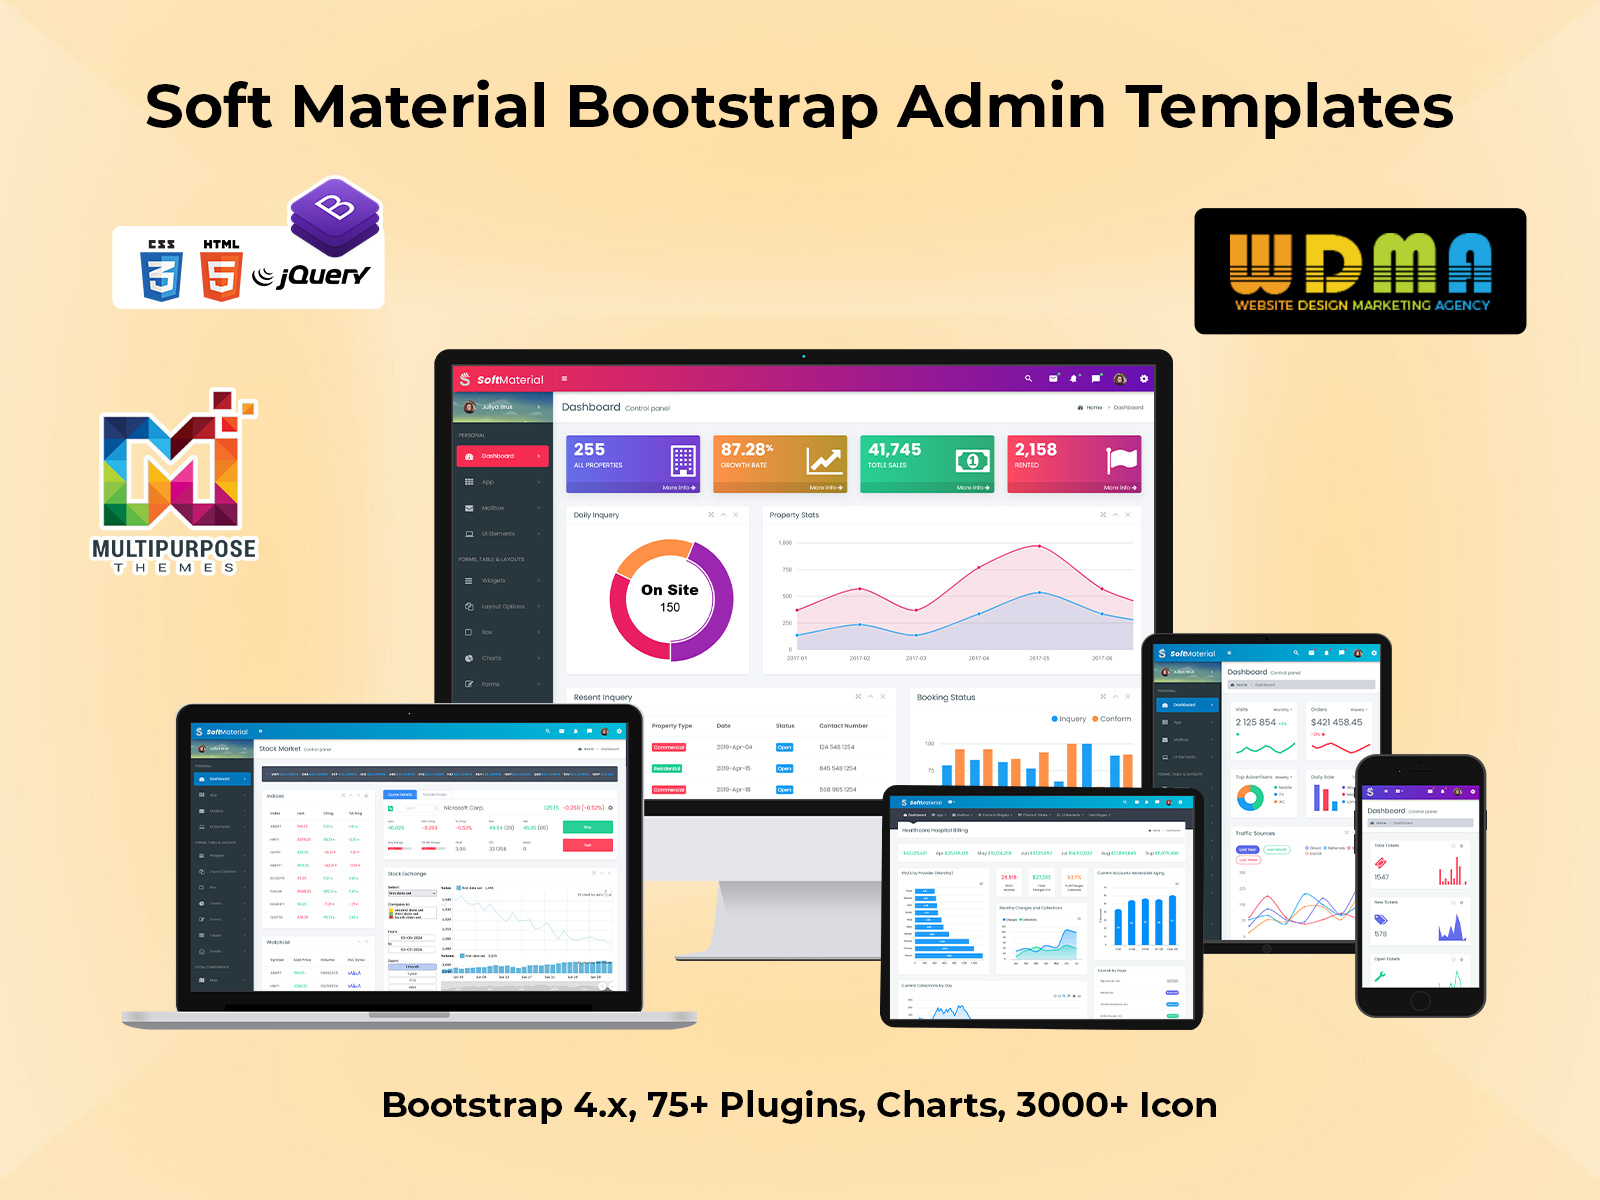 Optimizing A Soft Material Bootstrap Admin Template For Stock Market Use